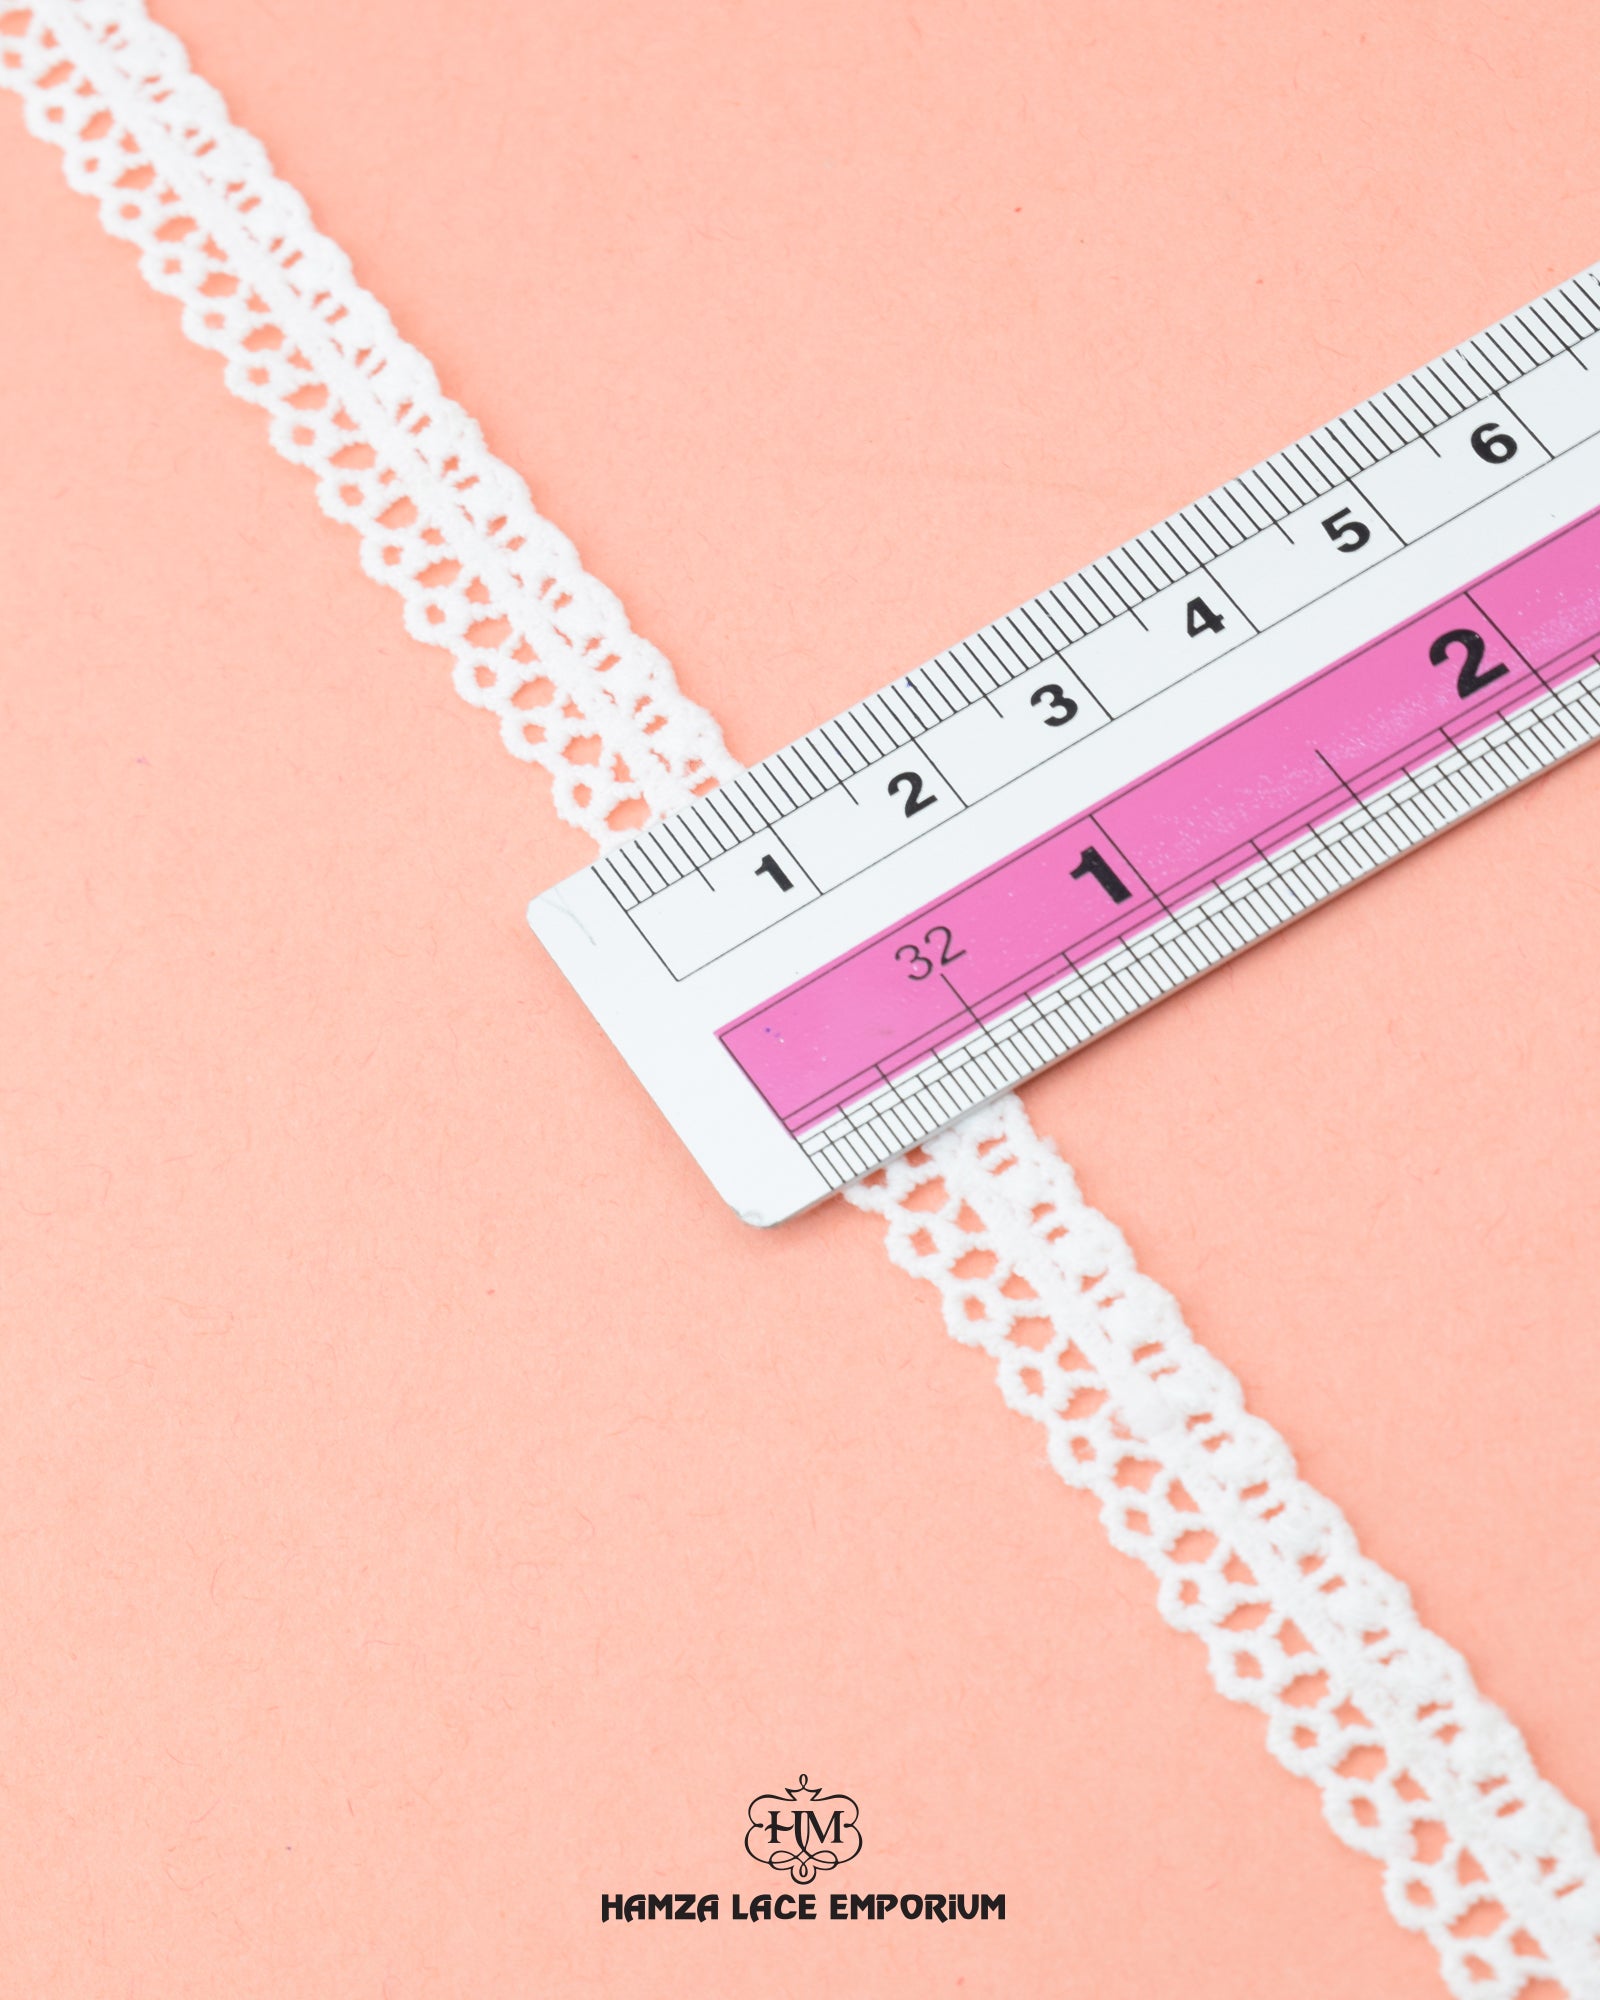 Size of the 'Edging Lace 23207' is shown as '0.5' inch with the help of a ruler